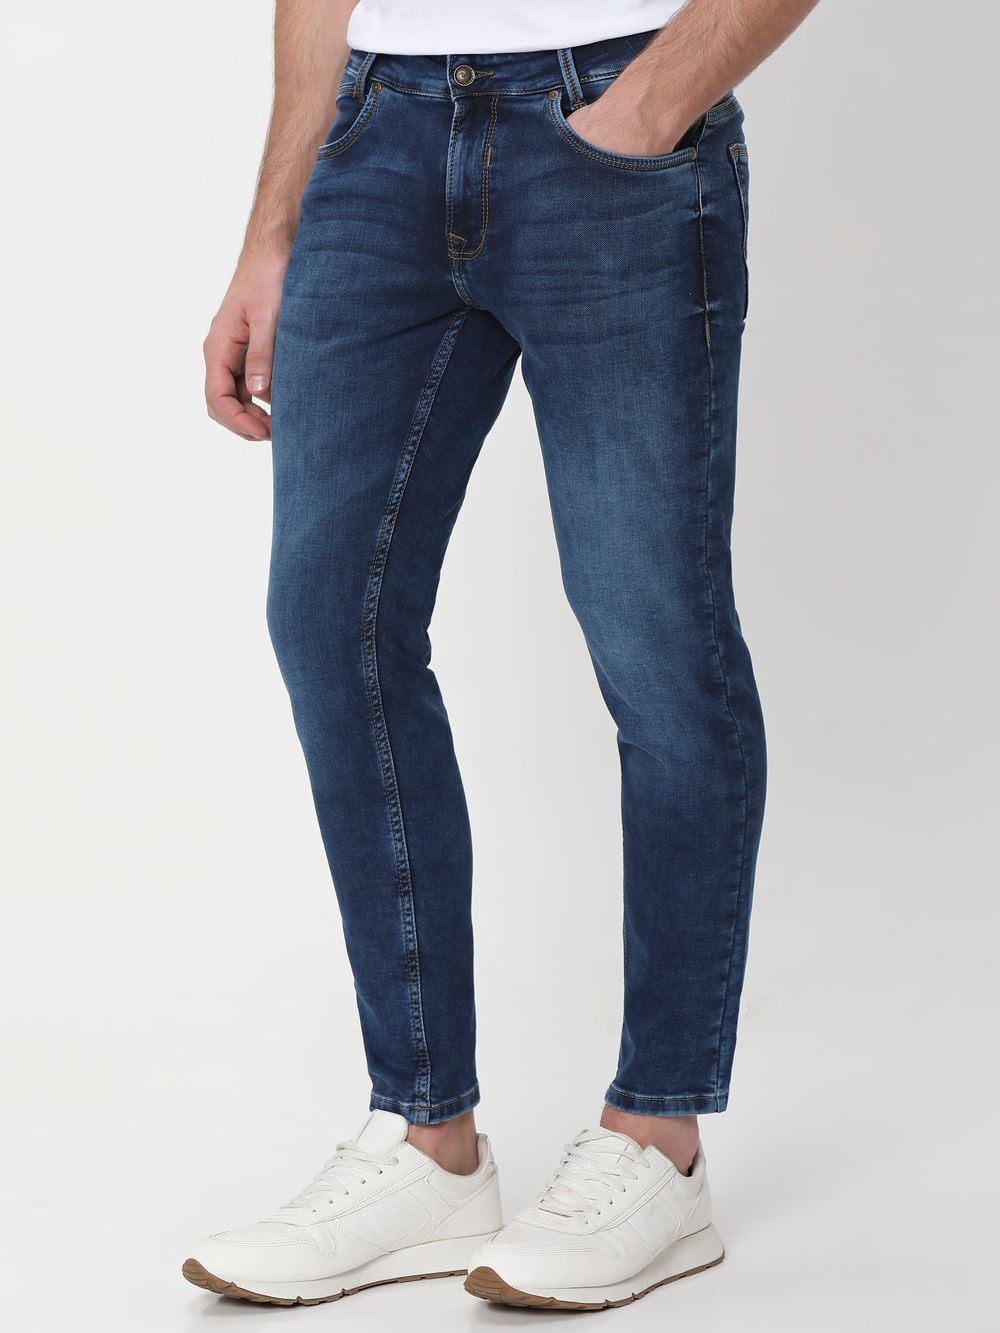 Tinted Ankle Length Fly Weight Jeans